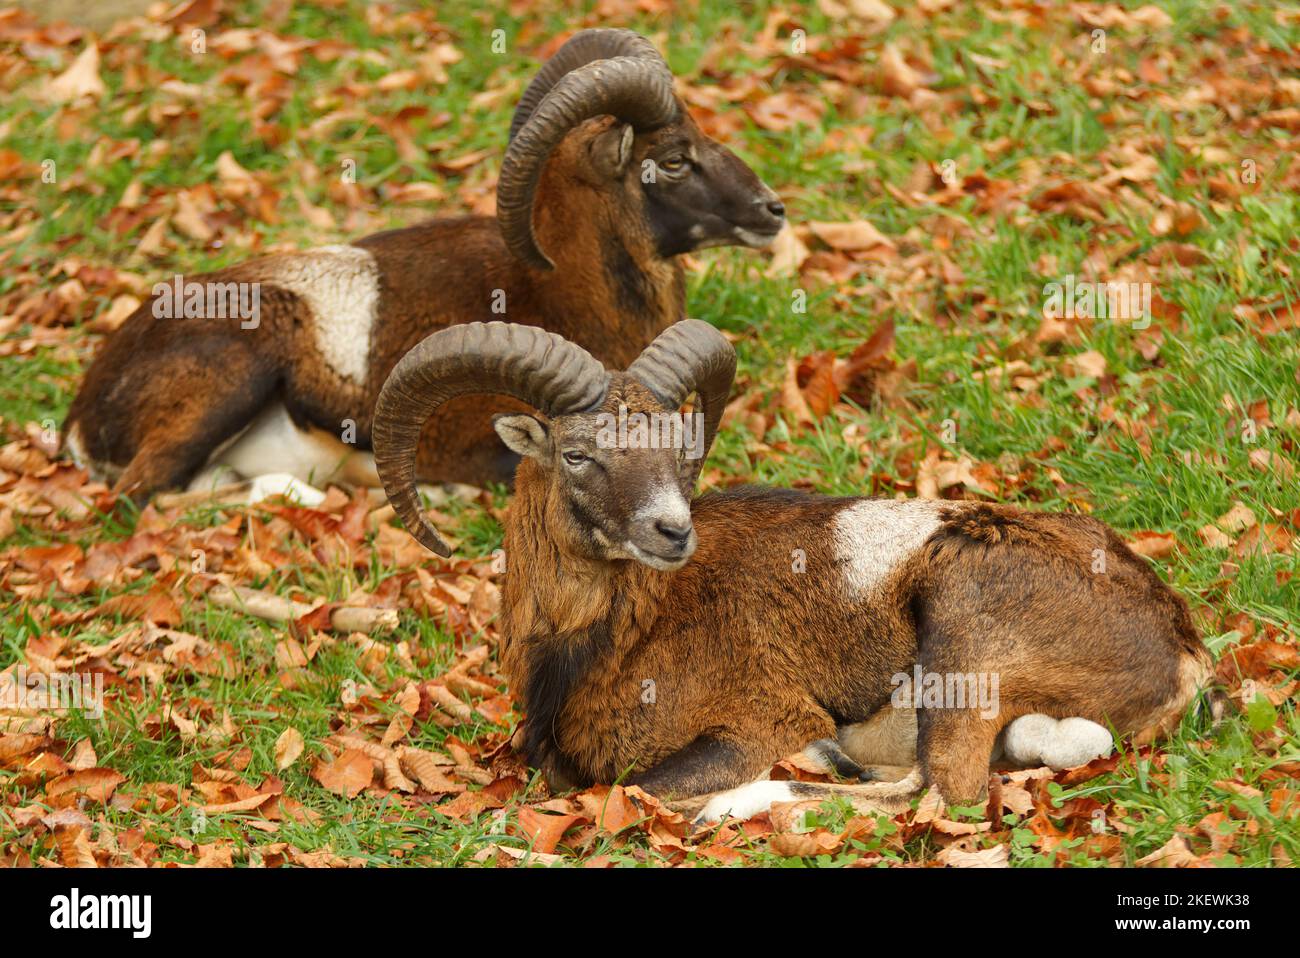 Two adult male mouflon with massive horns lying on a grassy meadow, autumn day, no people. Stock Photo